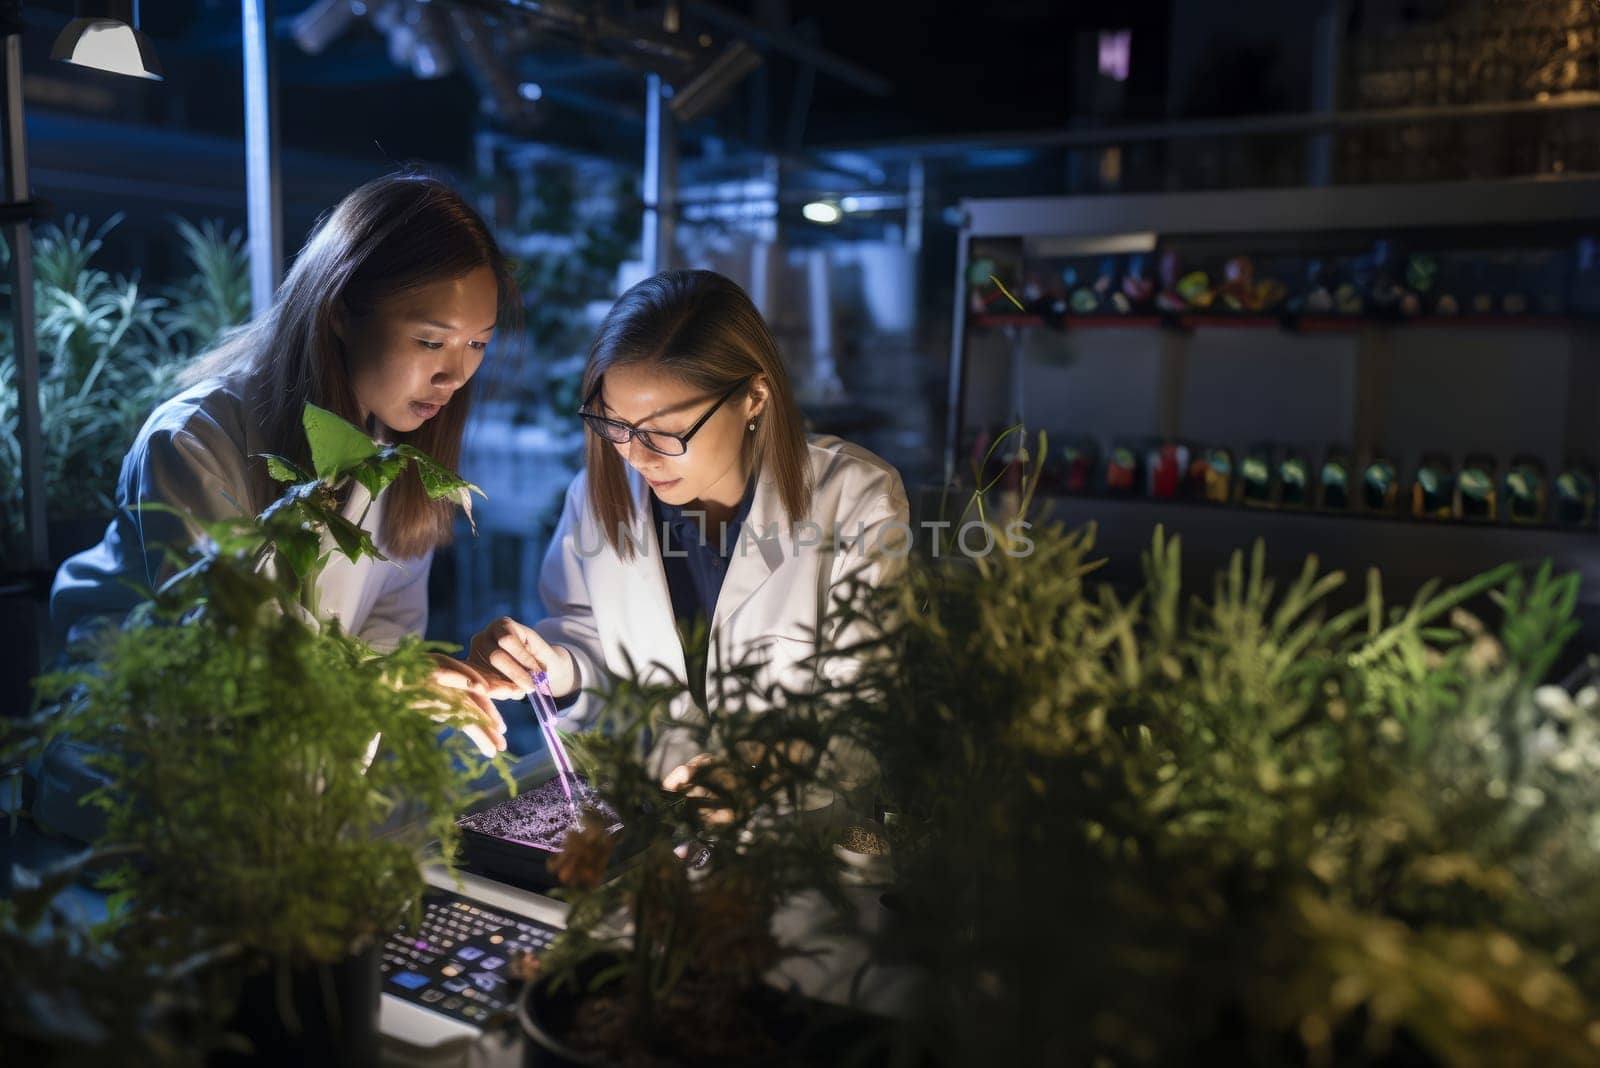 In a research institute, female biologist colleagues collaborate as they meticulously explore and study various plants, delving into the intricacies of botany with dedication and expertise.